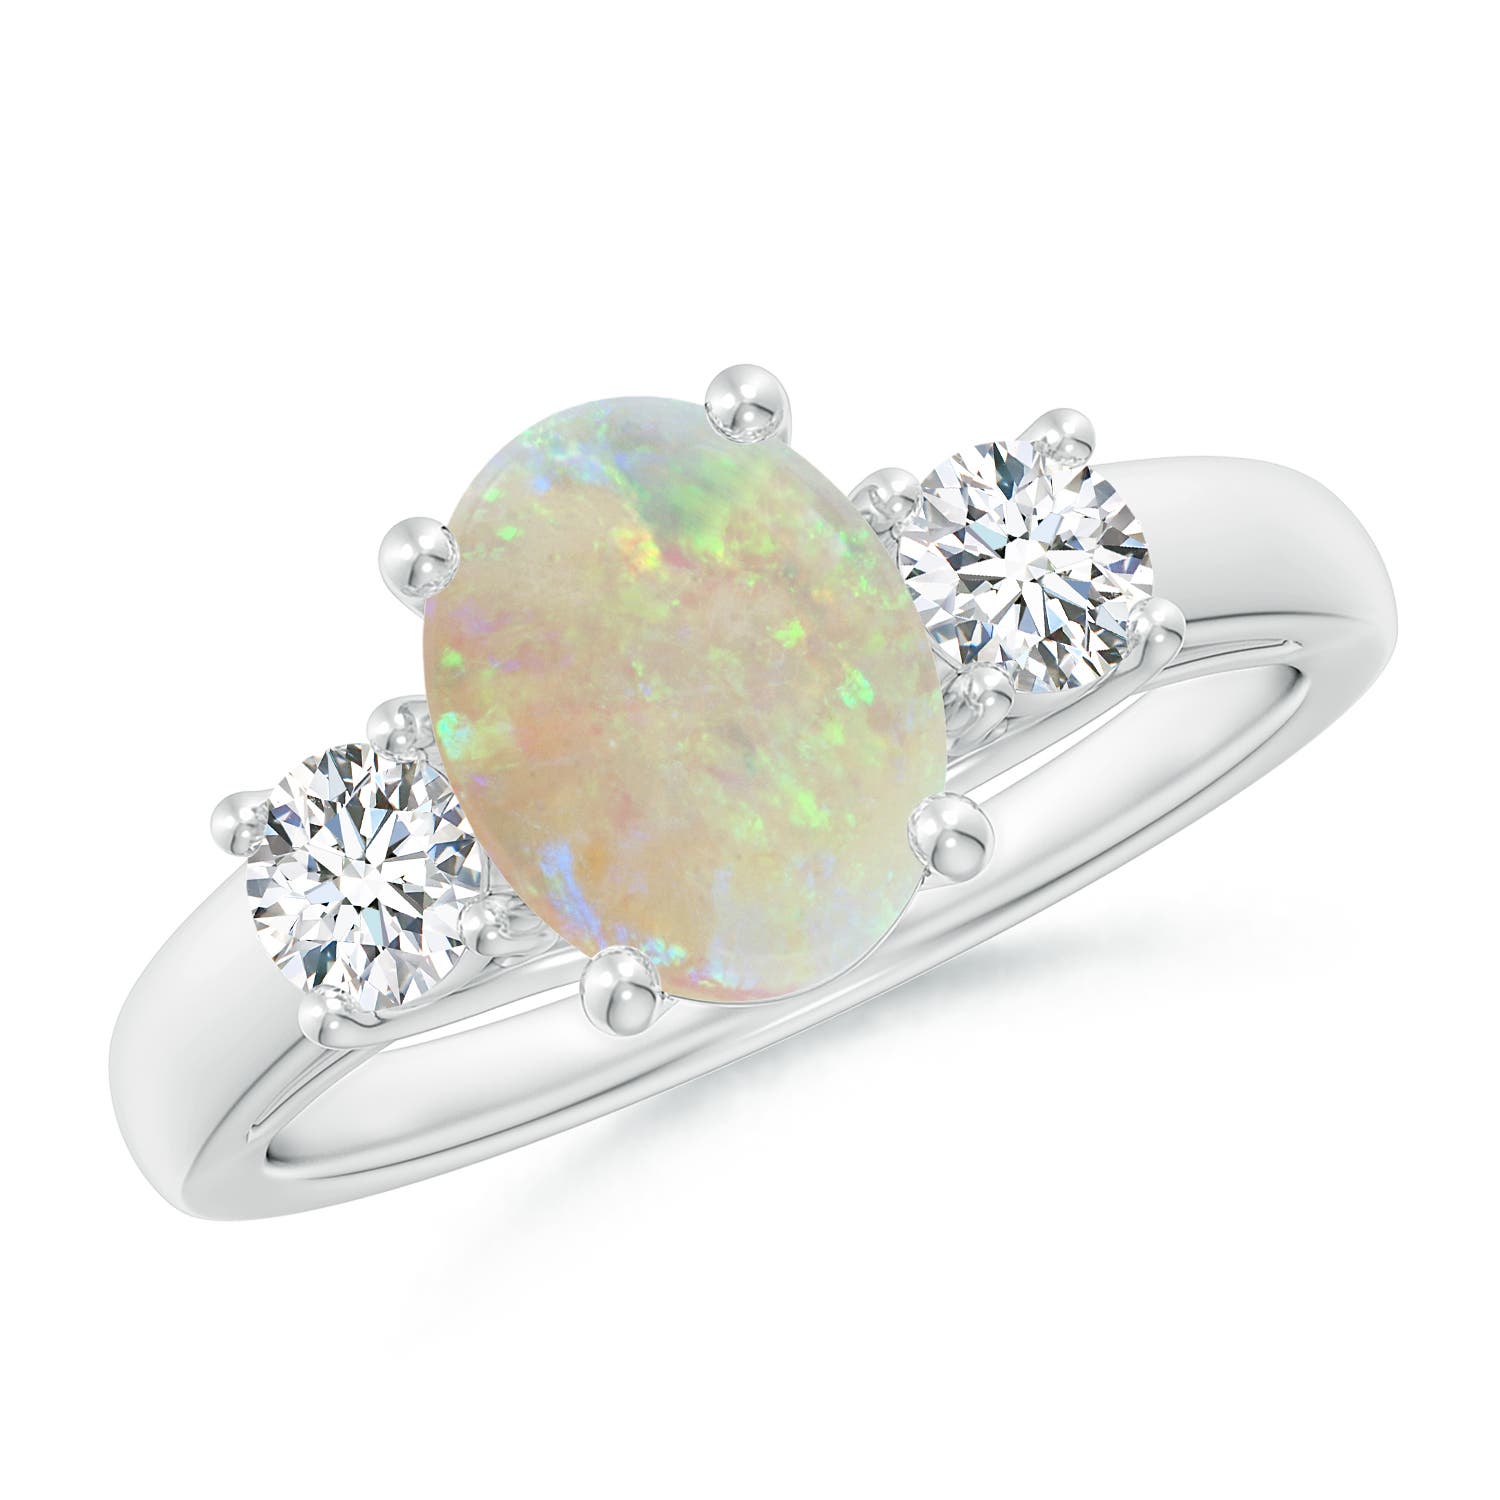 Oval Opal Ring with Diamond Accents | Angara